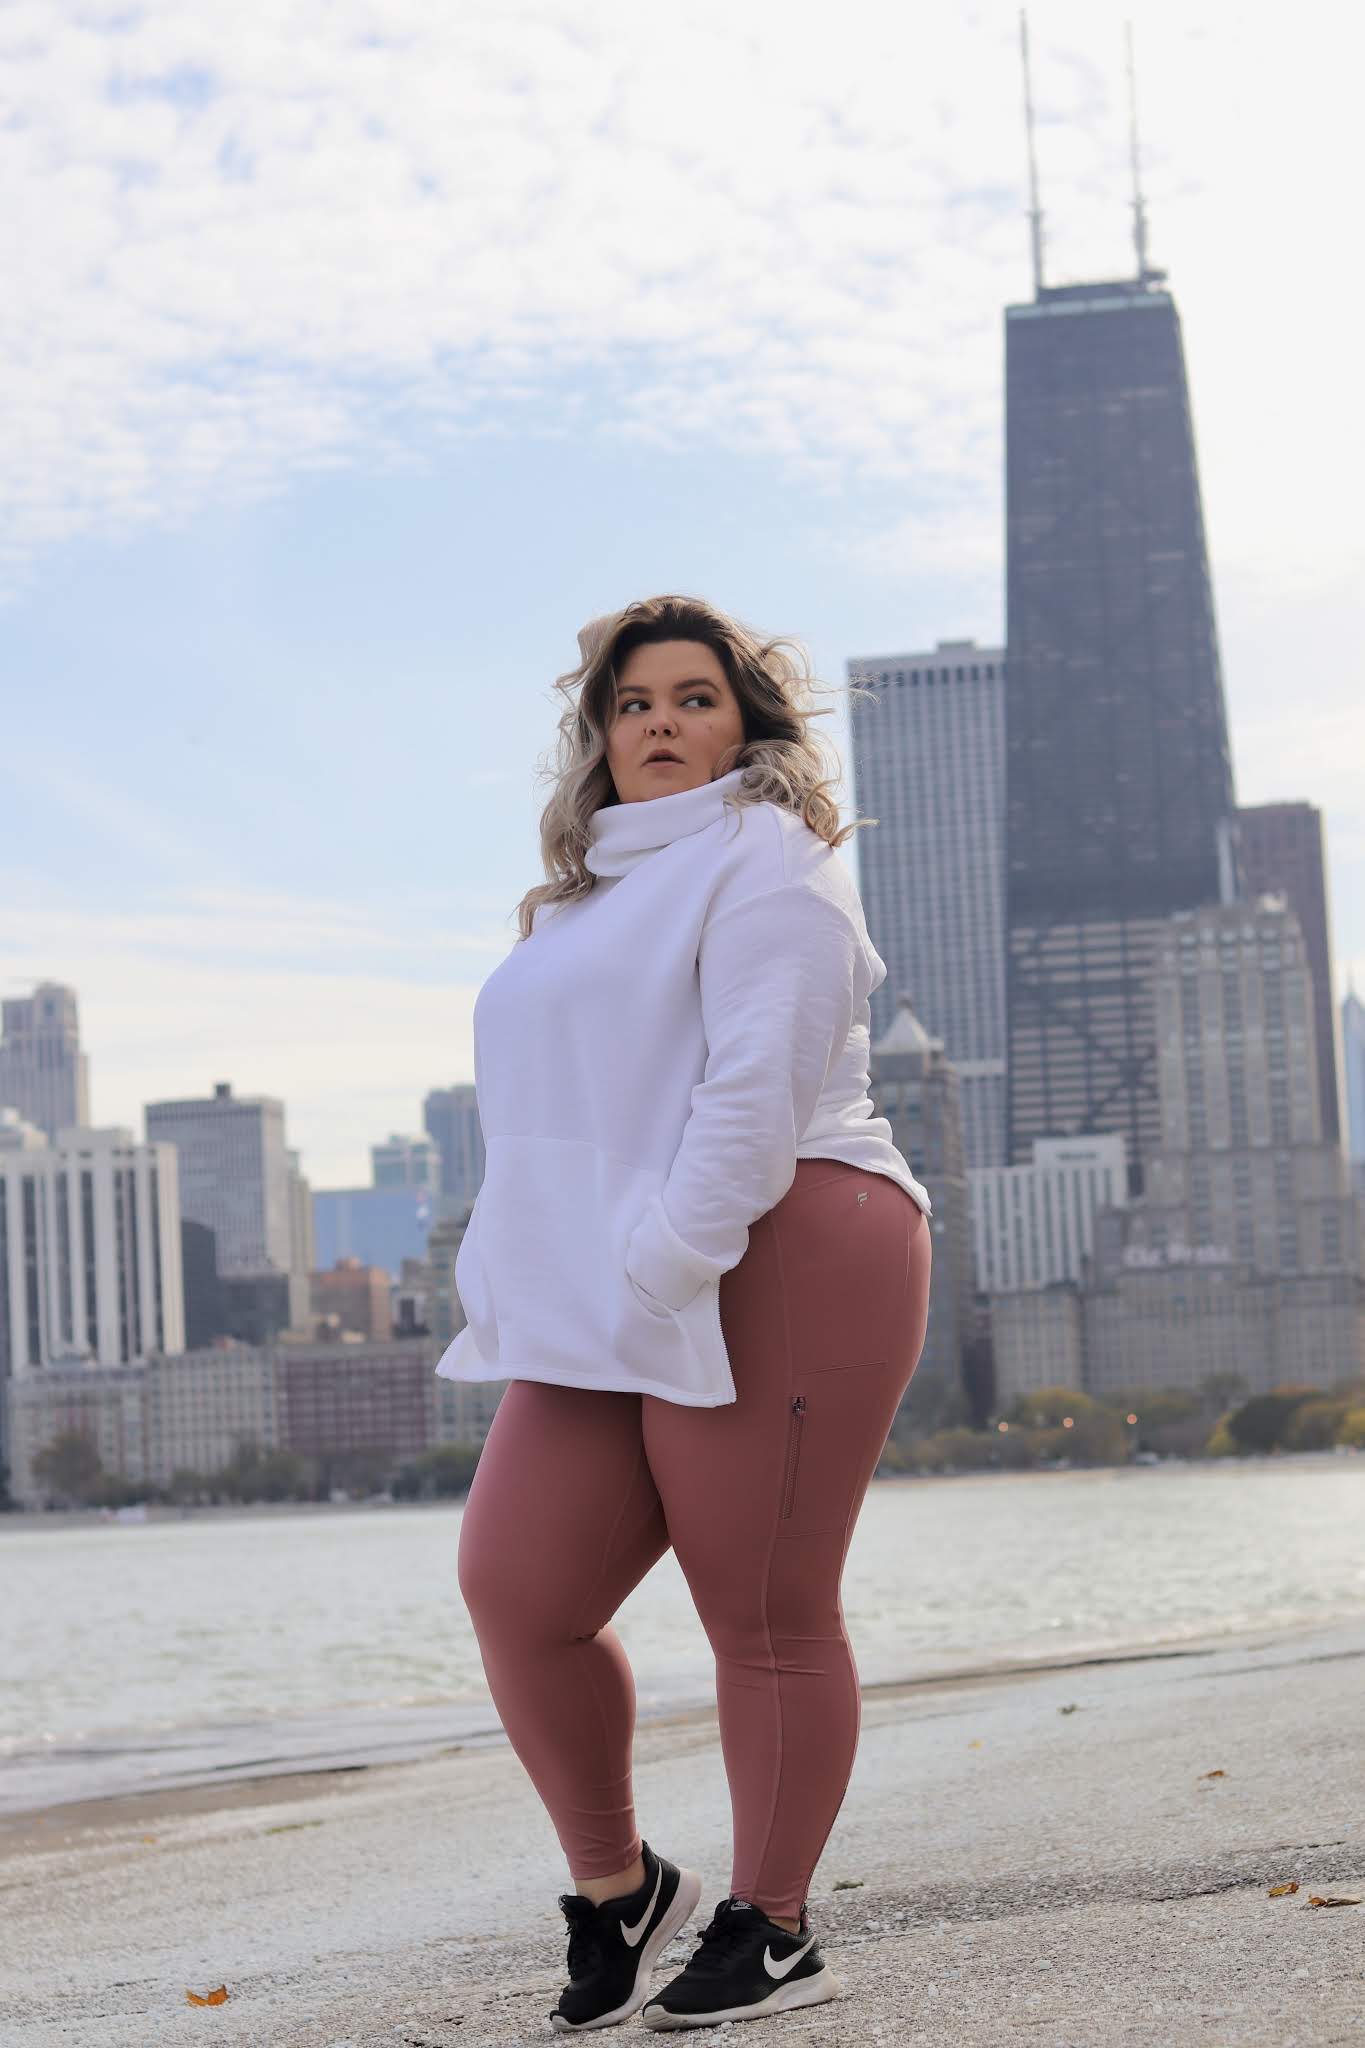 Chicago Plus Size Petite Fashion Blogger Natalie in the City shares a  Fabletics promo code 2020